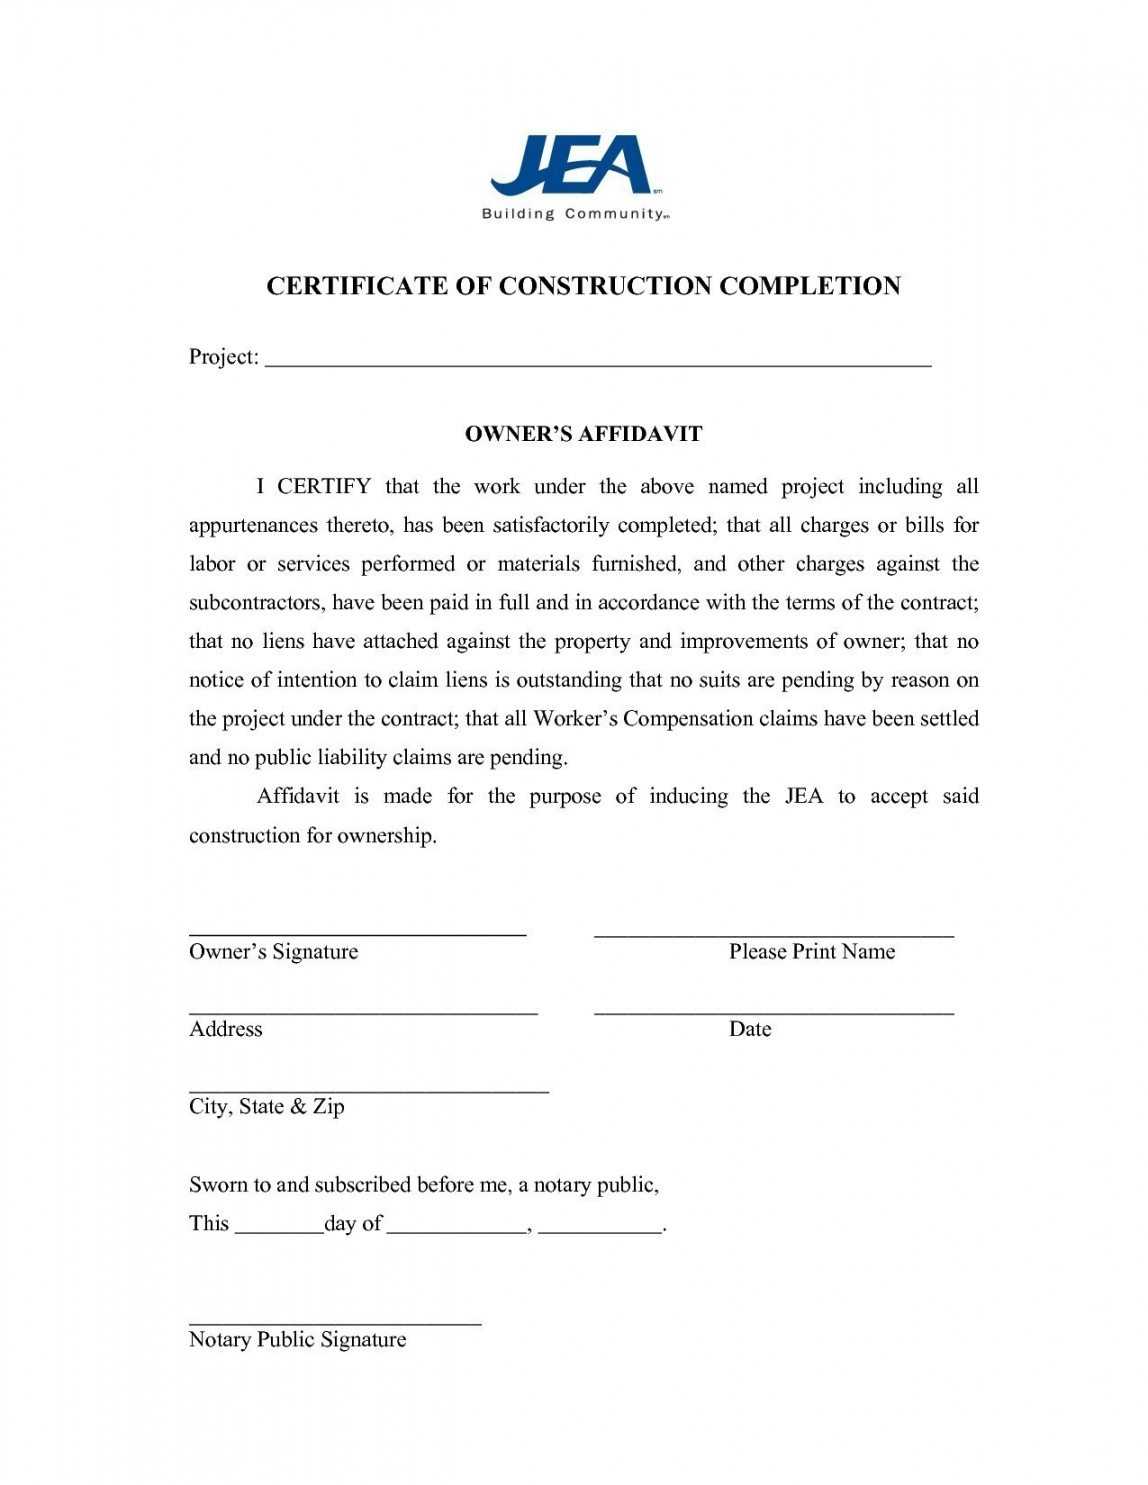 Certificate Of Completion Template Word 2010 Blank For Certificate Of Completion Construction Templates